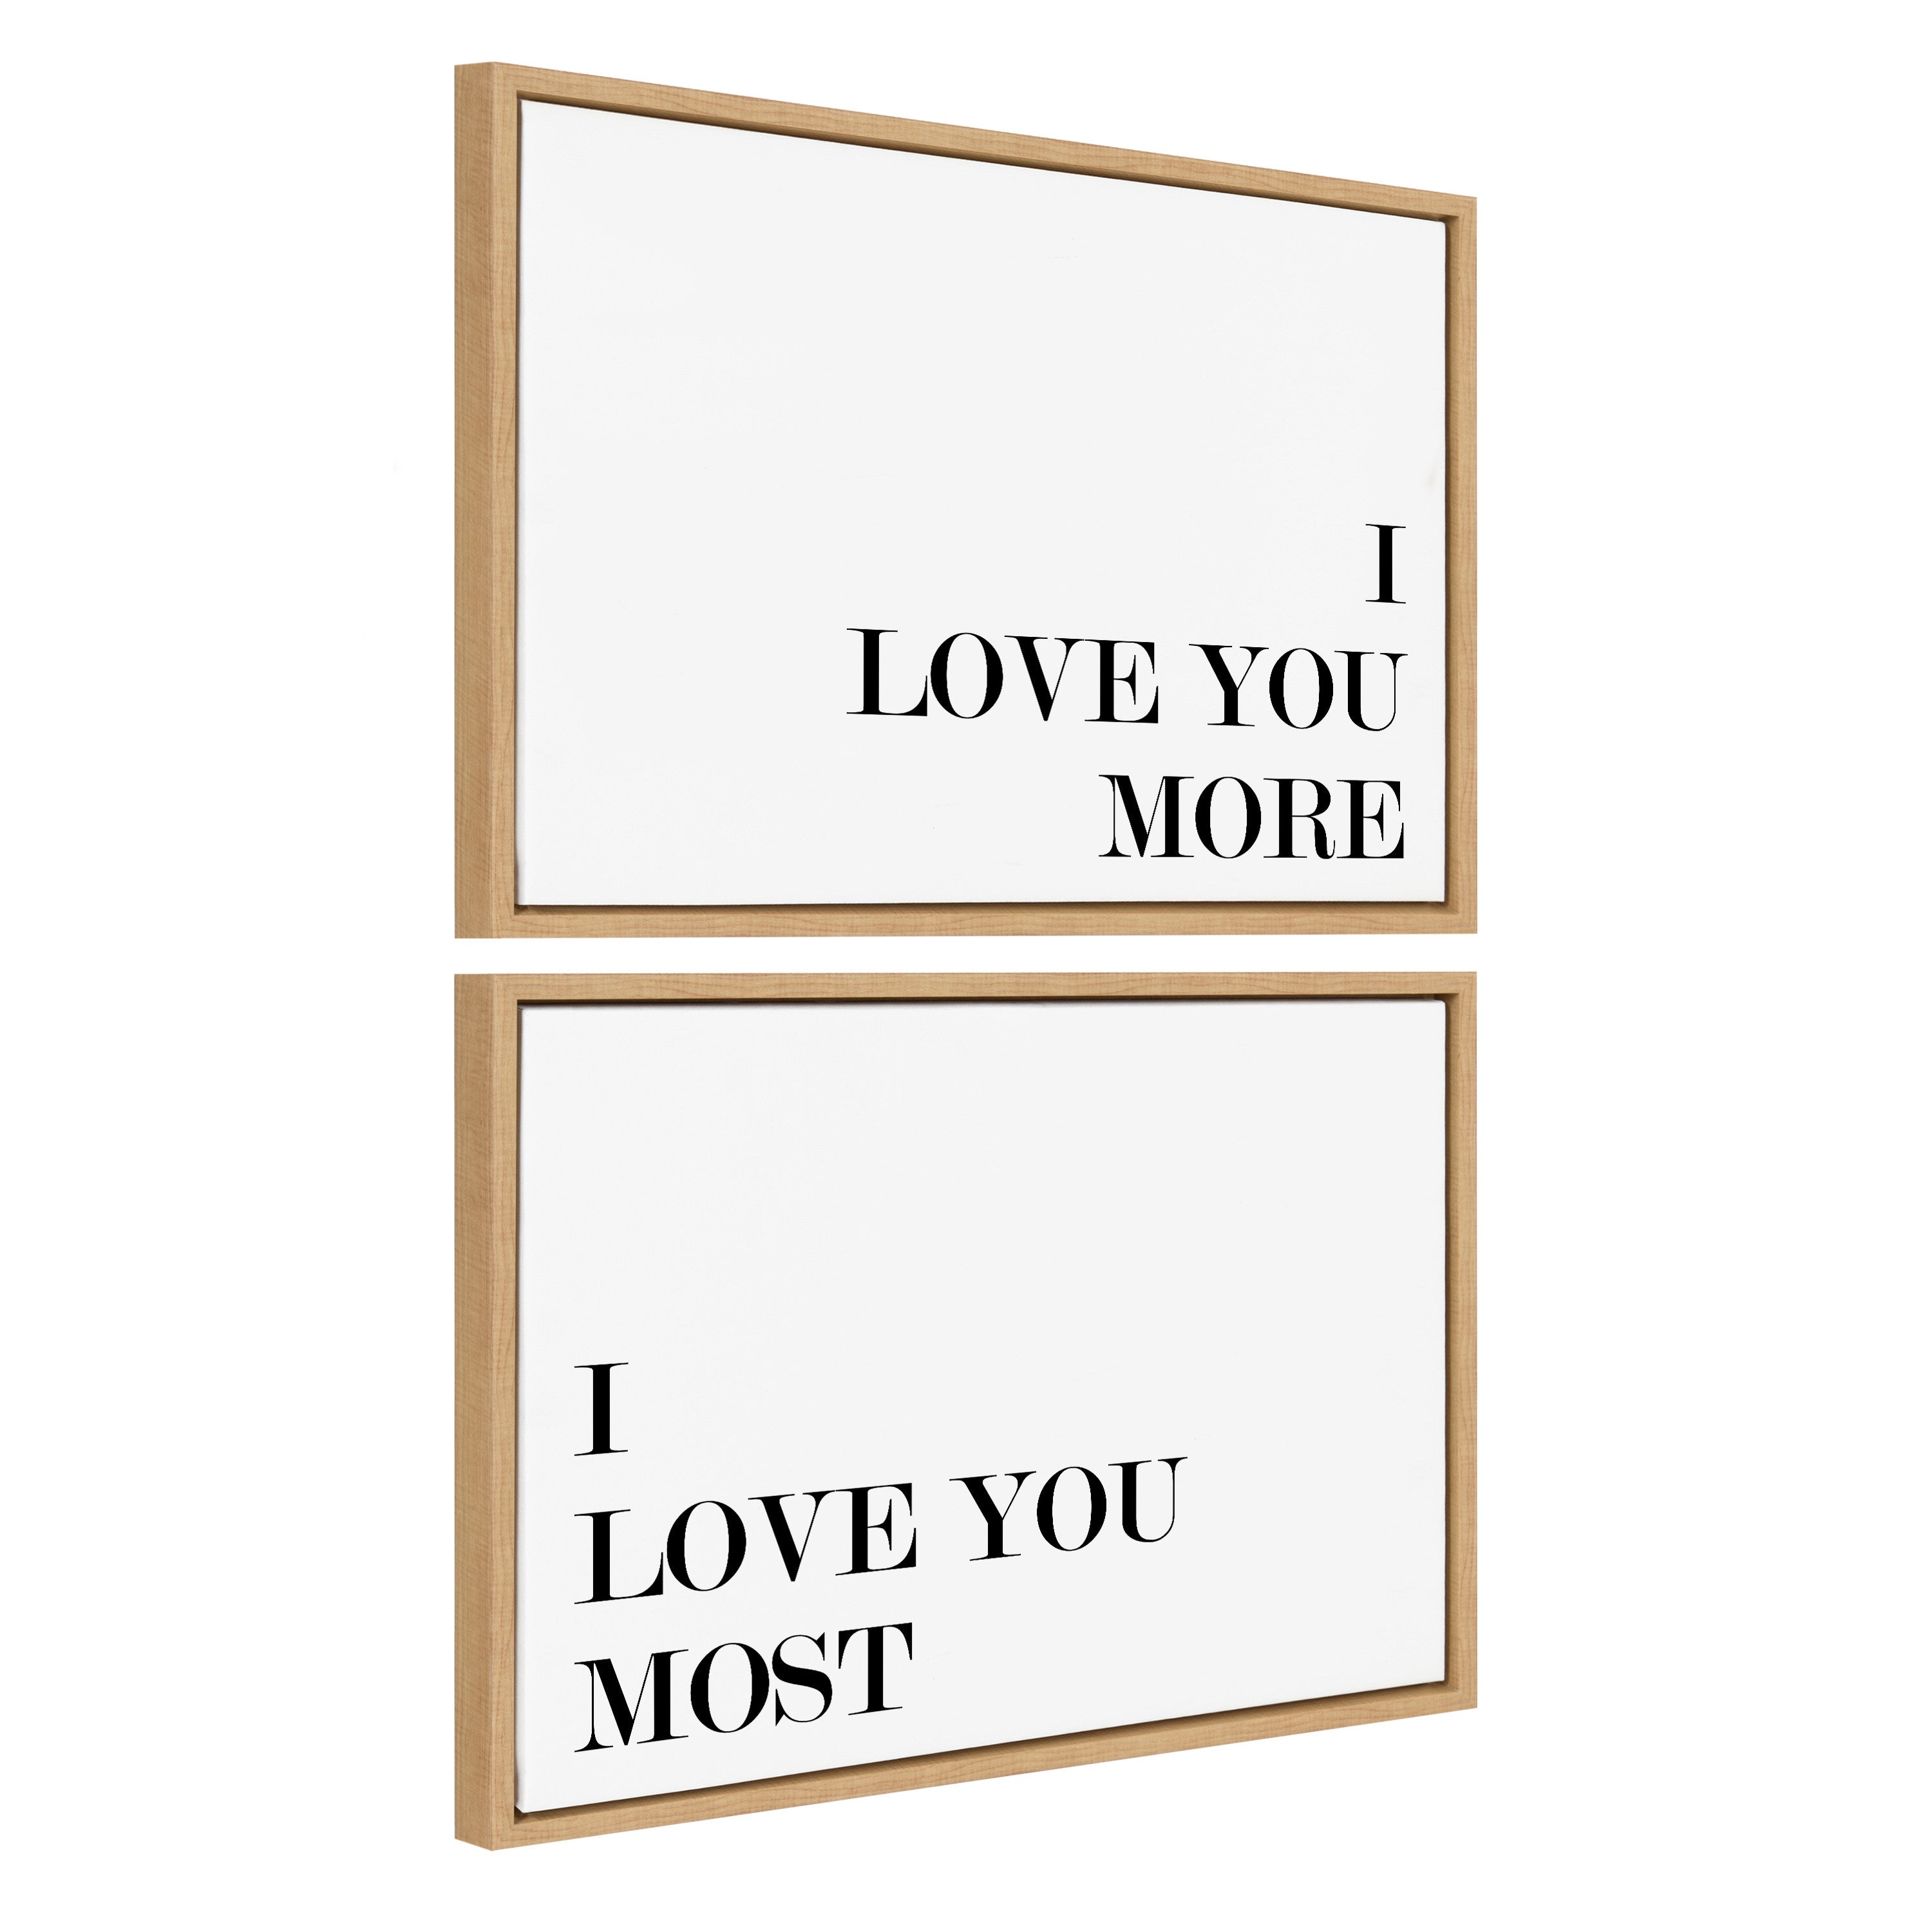 Sylvie I Love You More and I Love You Most Framed Canvas Art Set by Maggie Price of Hunt and Gather Goods